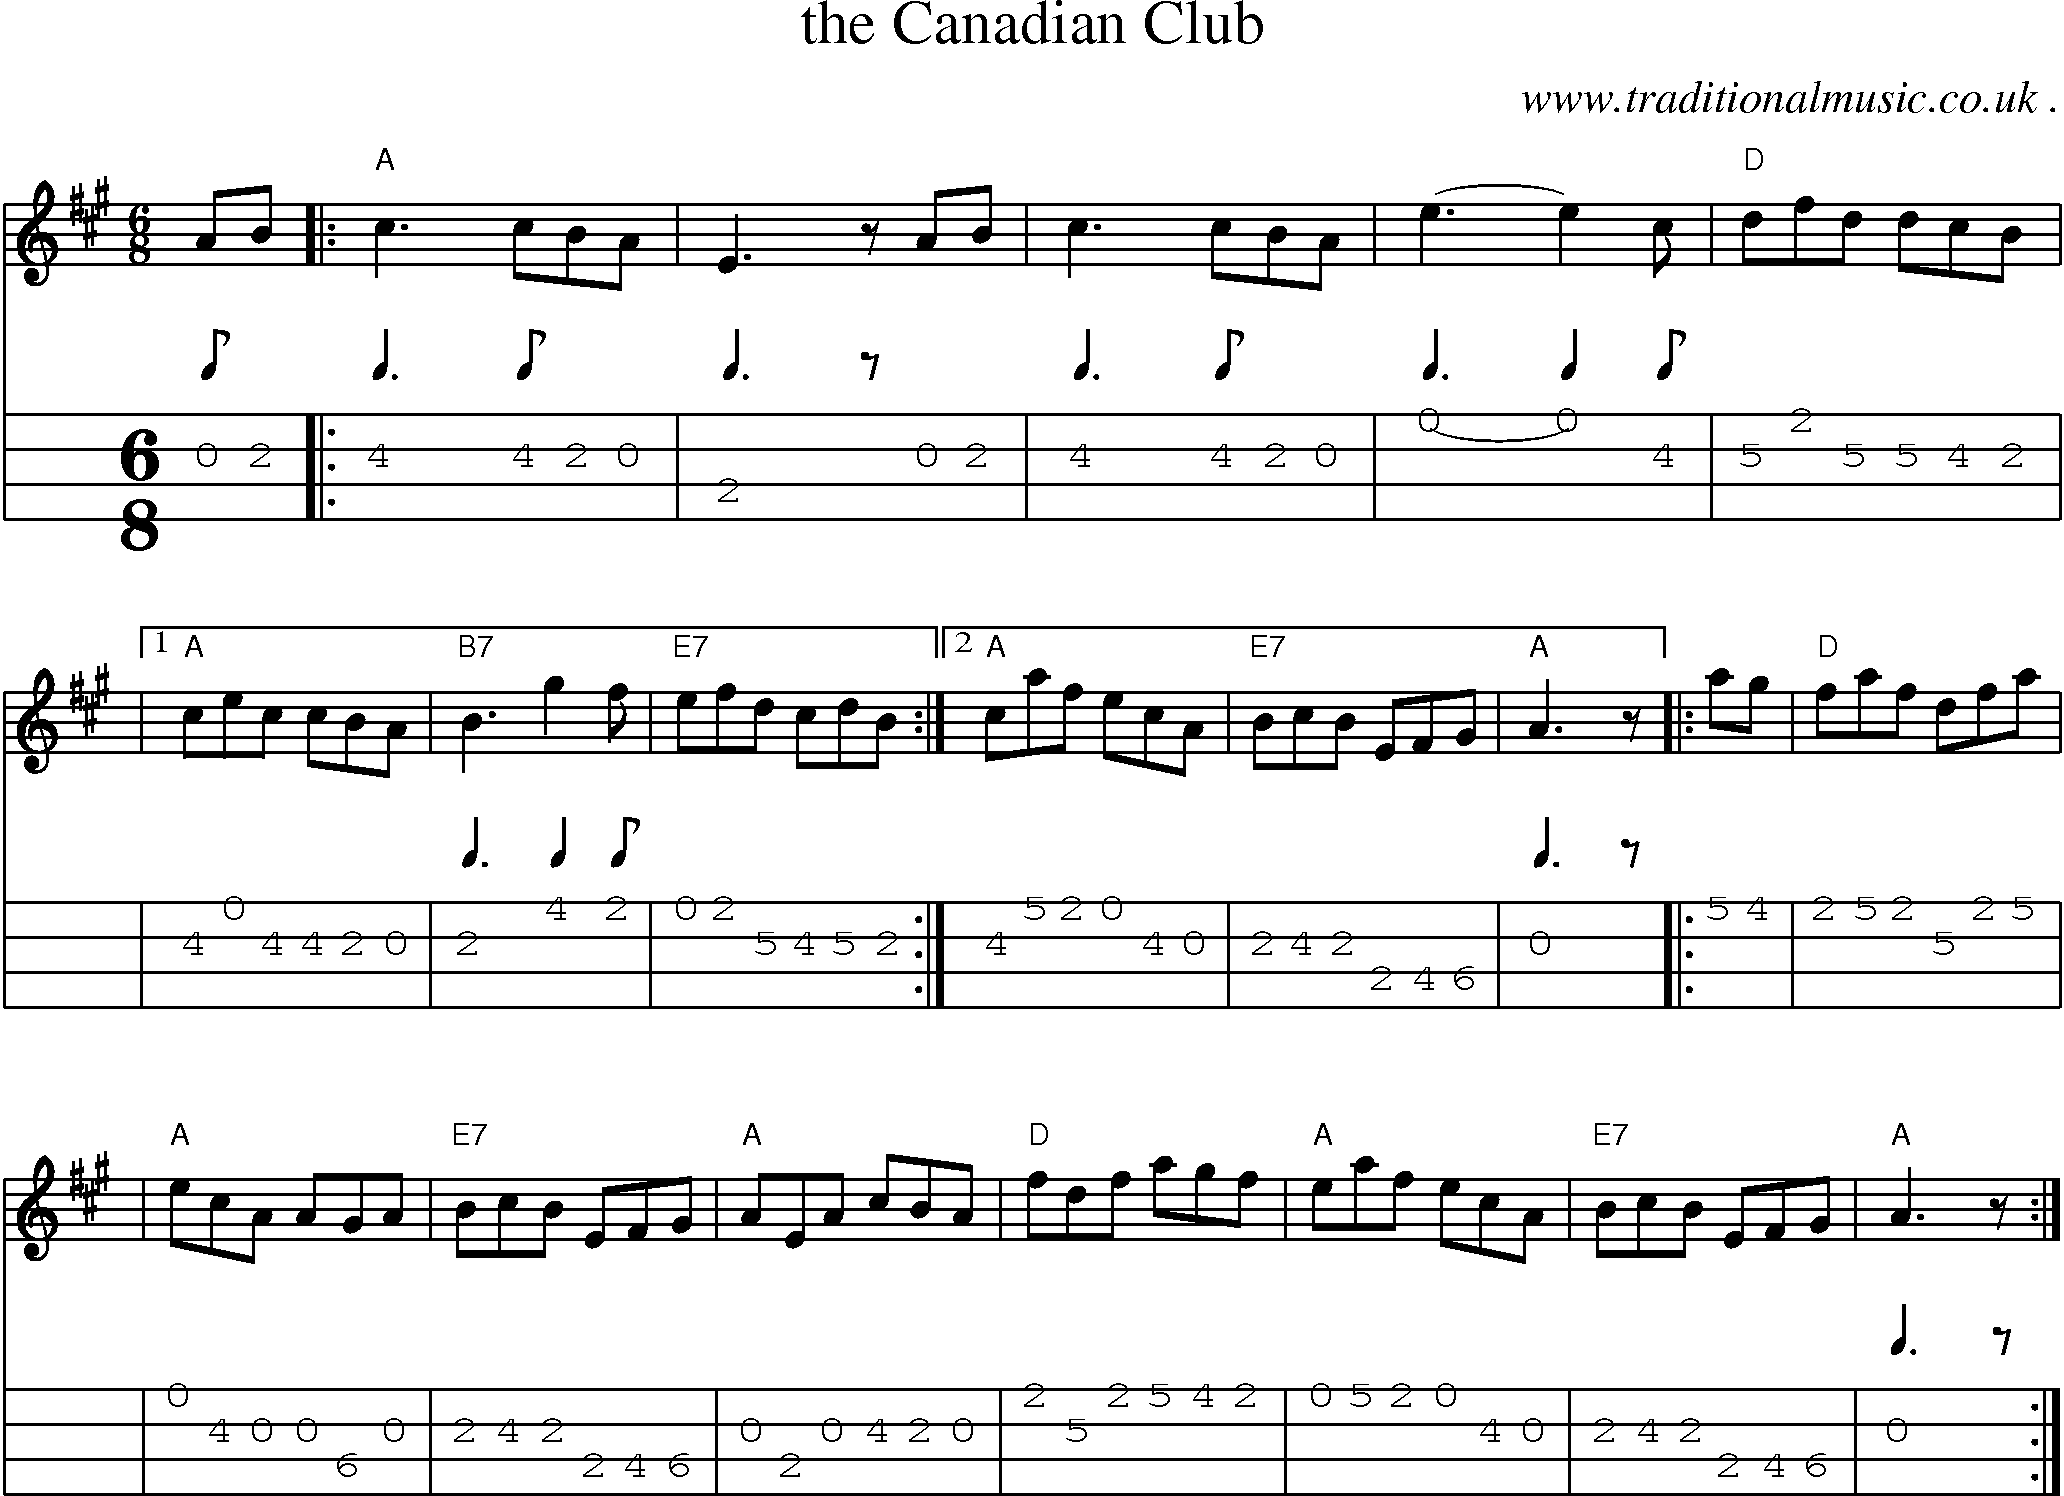 Sheet-music  score, Chords and Mandolin Tabs for The Canadian Club